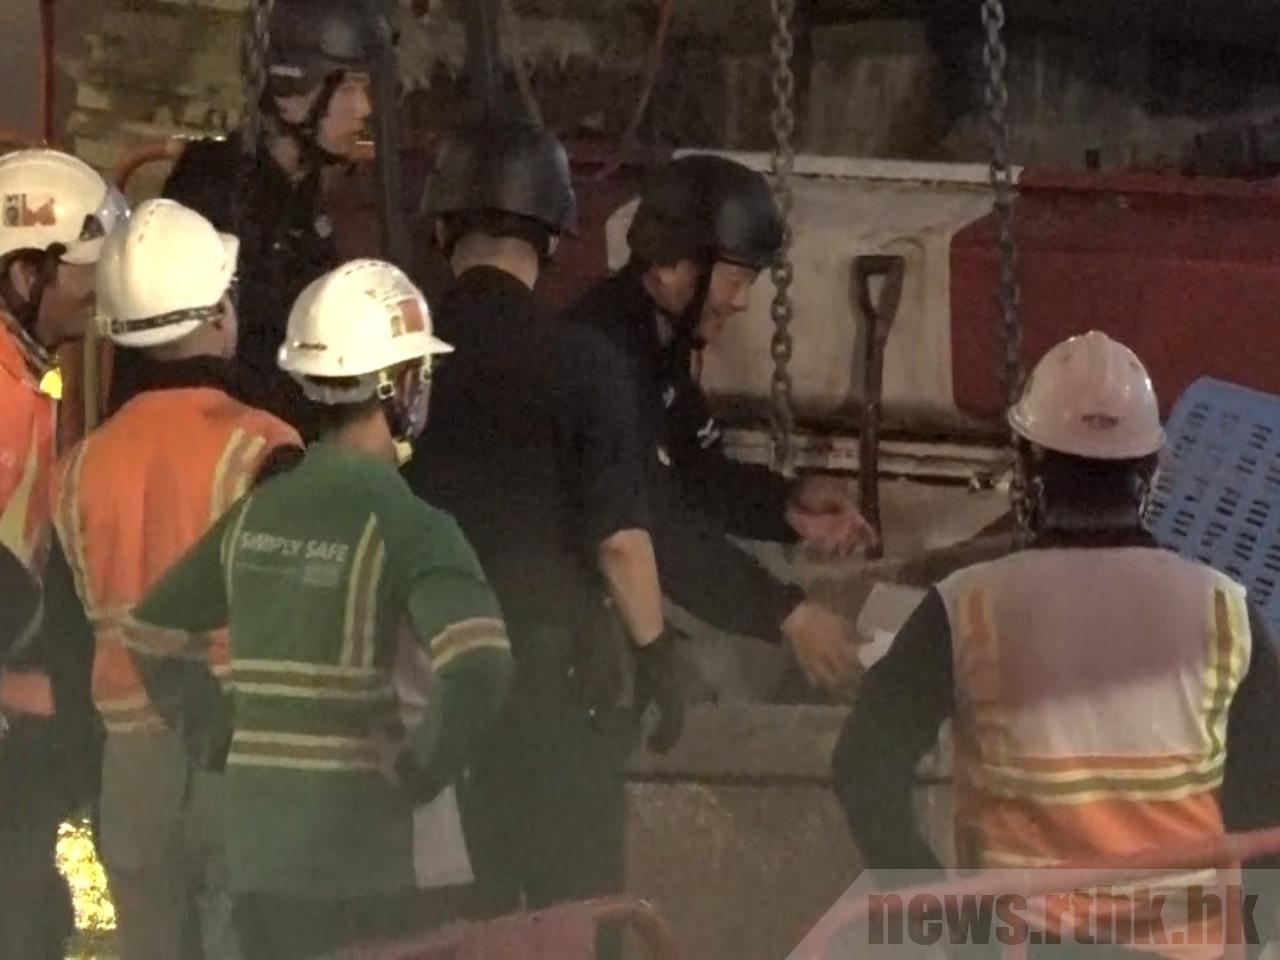 Another bomb unearthed in downtown Hong Kong